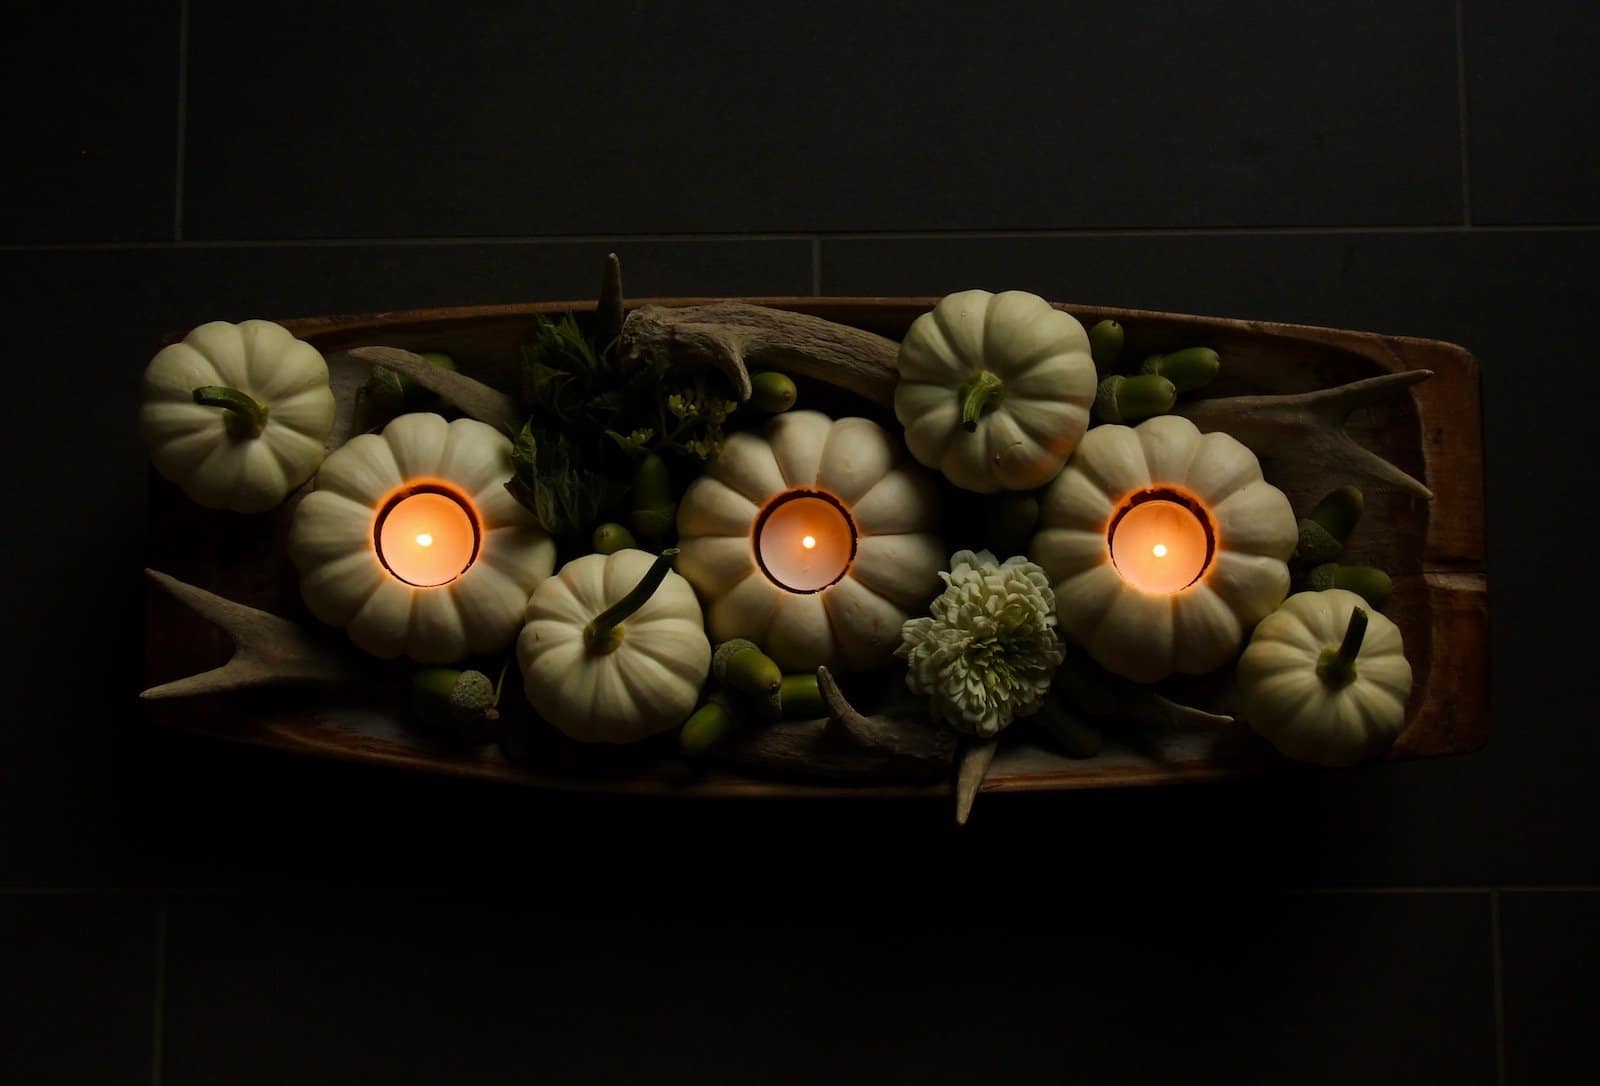 This white pumpkin centerpiece is an easy fall decor DIY. The mini pumpkin tea lights are quick to make and will light up your autumn table! | Home for the Harvest #minipumpkins #pumpkins #pumpkincenterpiece #pumpkin #falldecor #autumndecor #homefortheharvest 